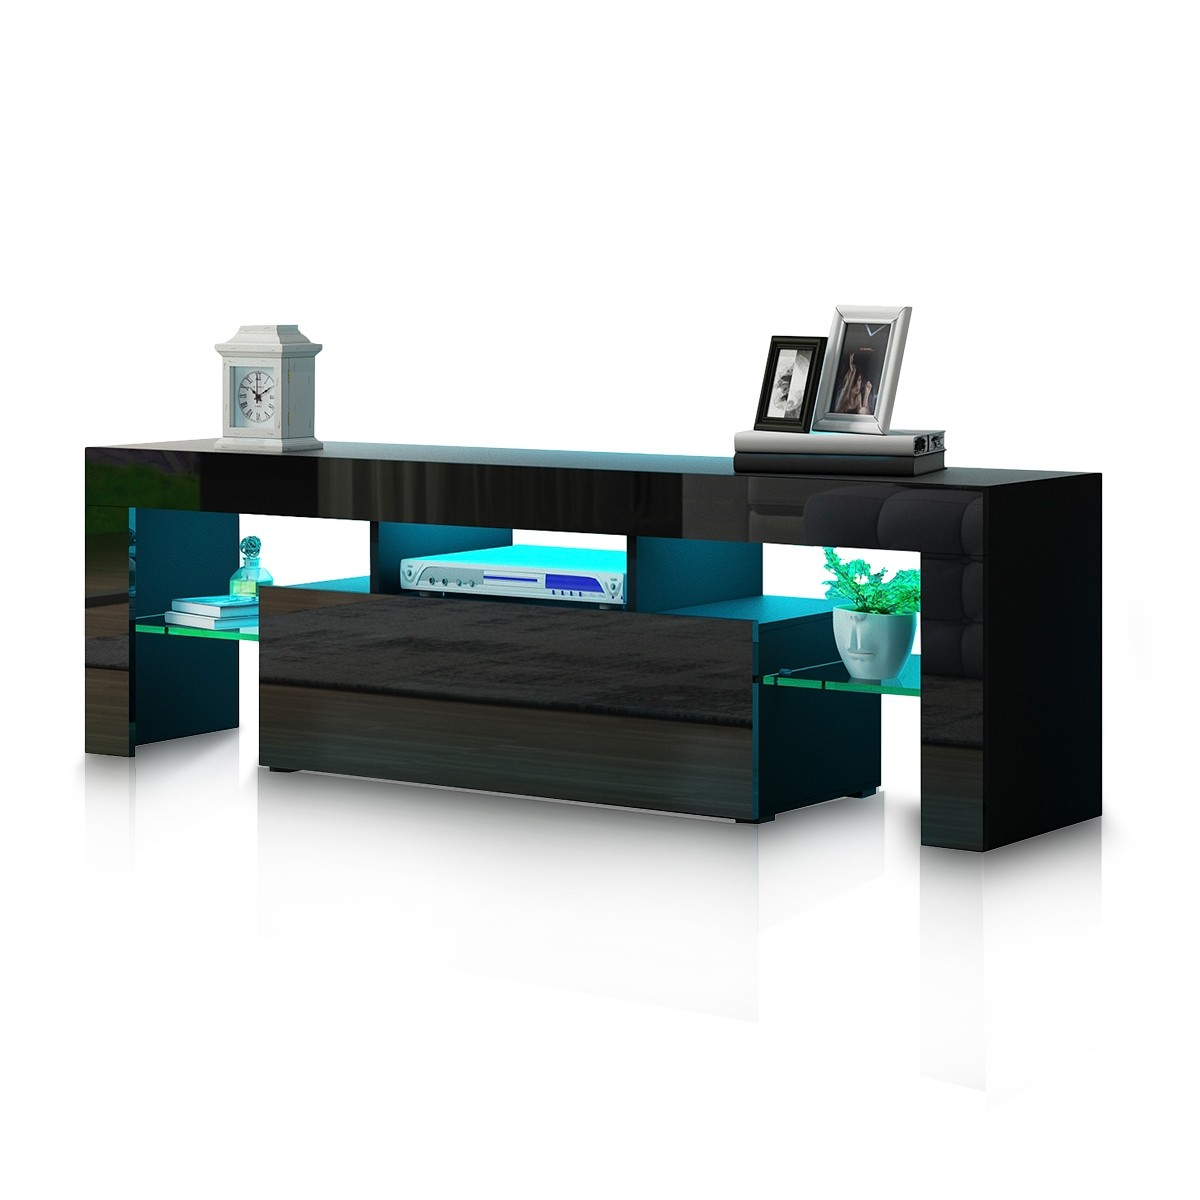 LED TV Cabinet - Two Colours Available